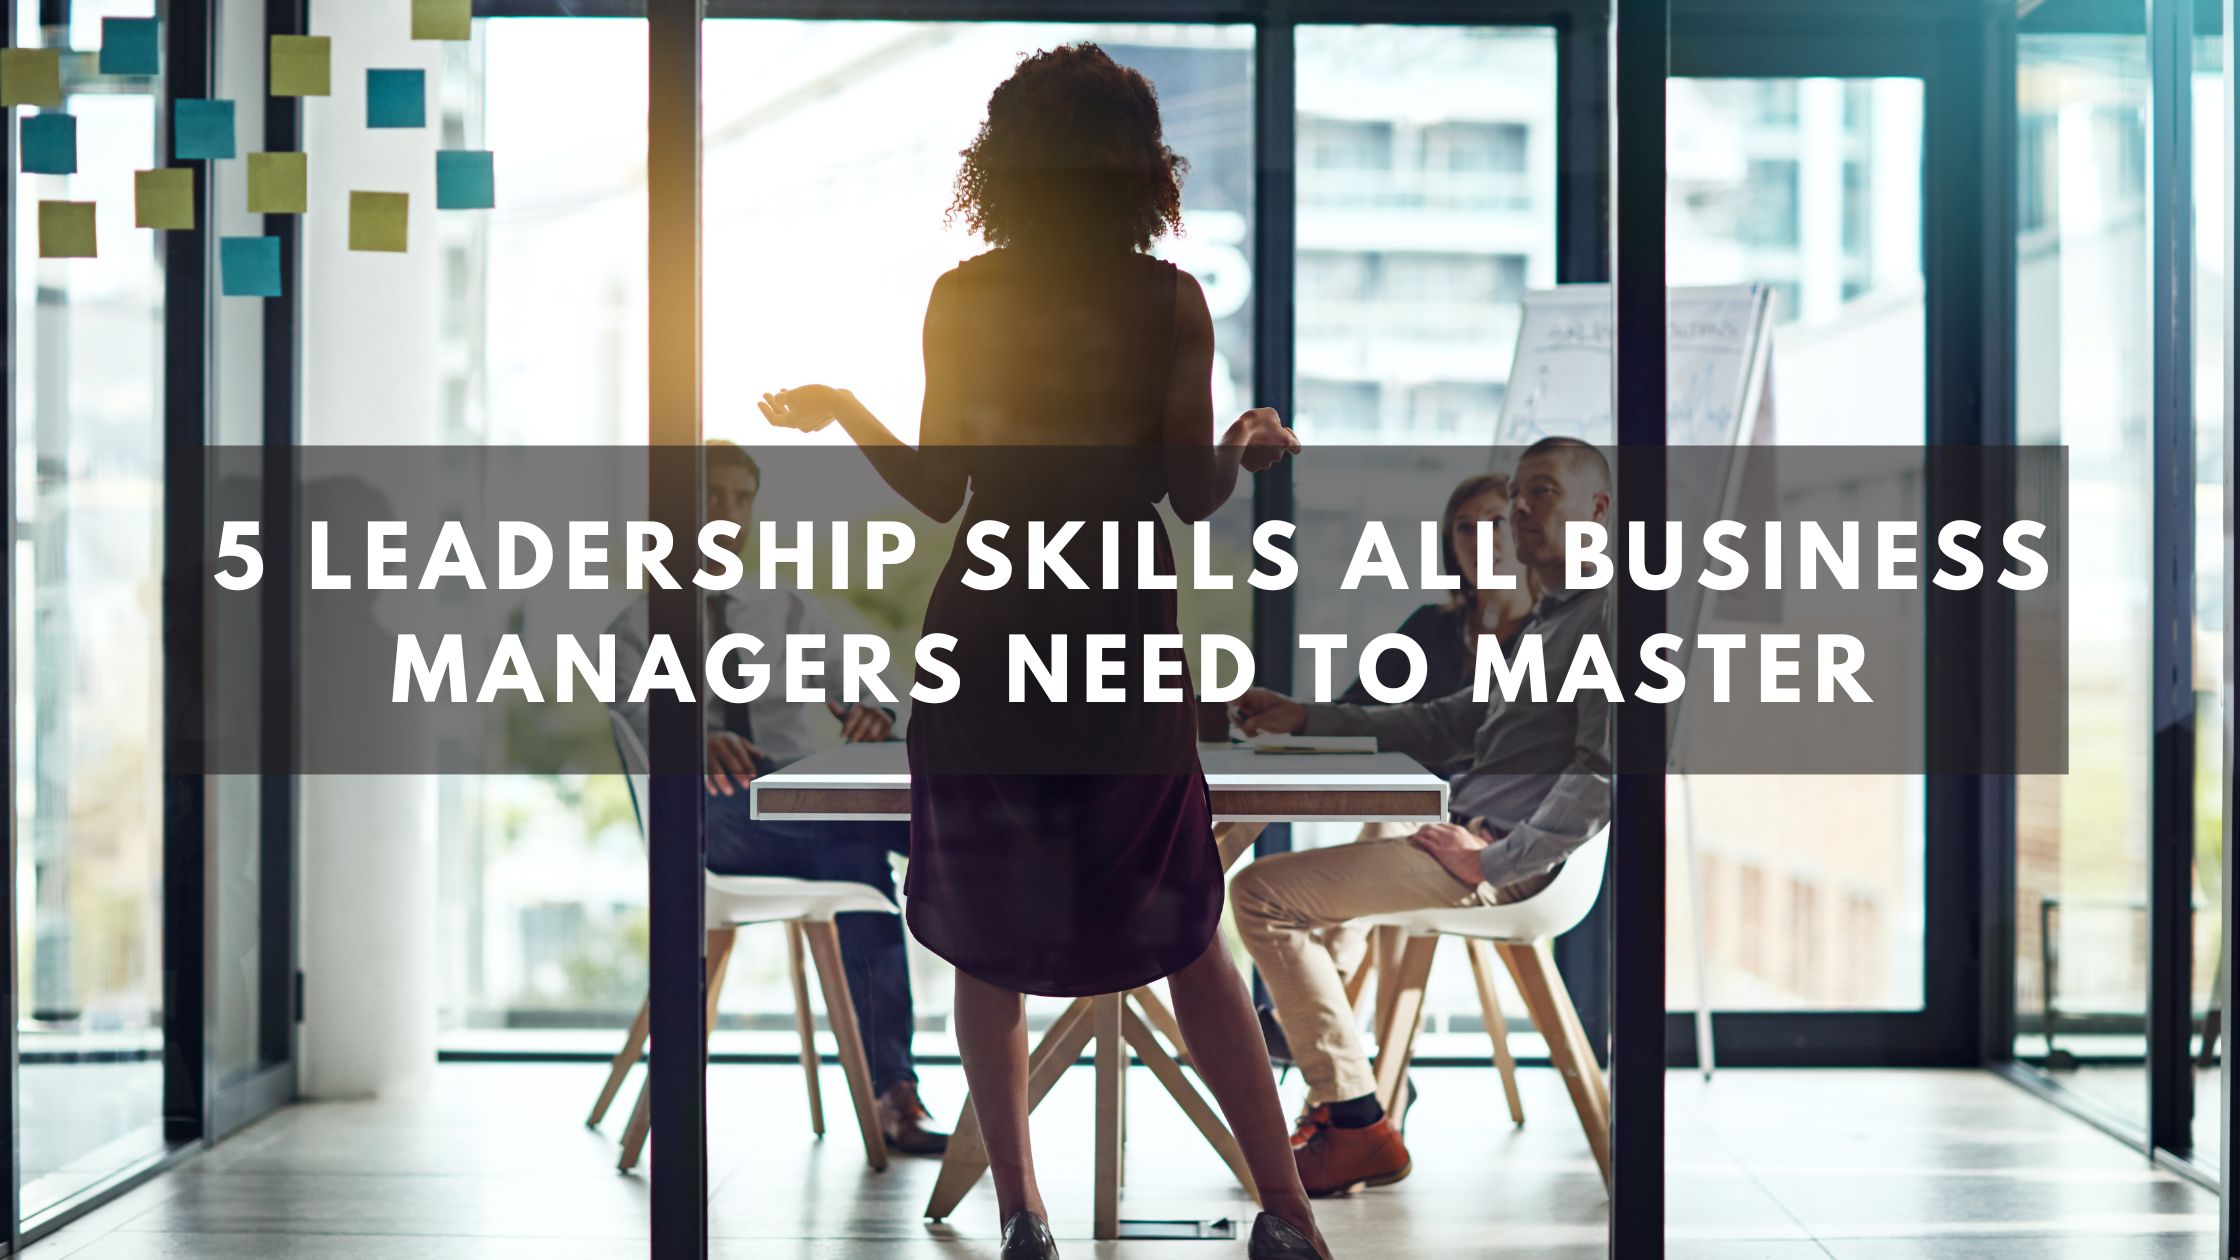 5 Leadership Skills All Business Managers Need to Master